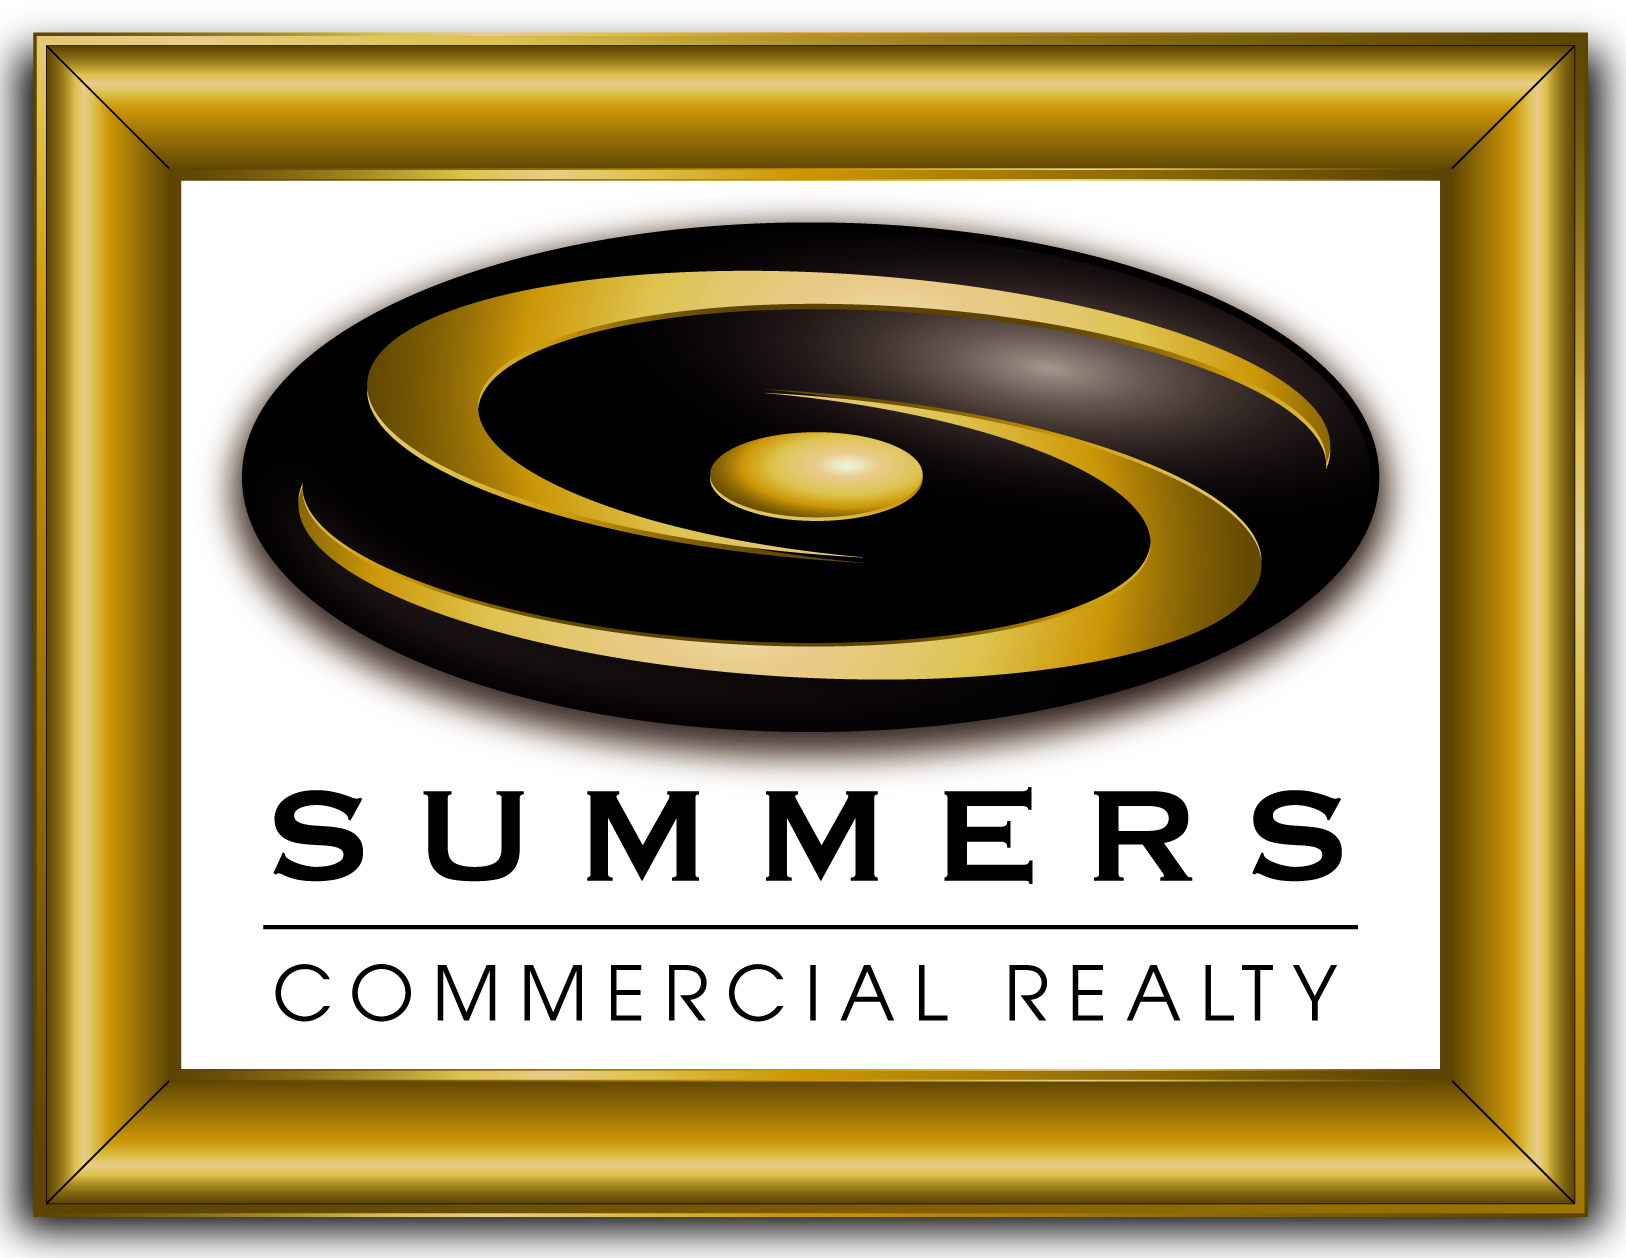 A gold and black logo for summers commercial realty.